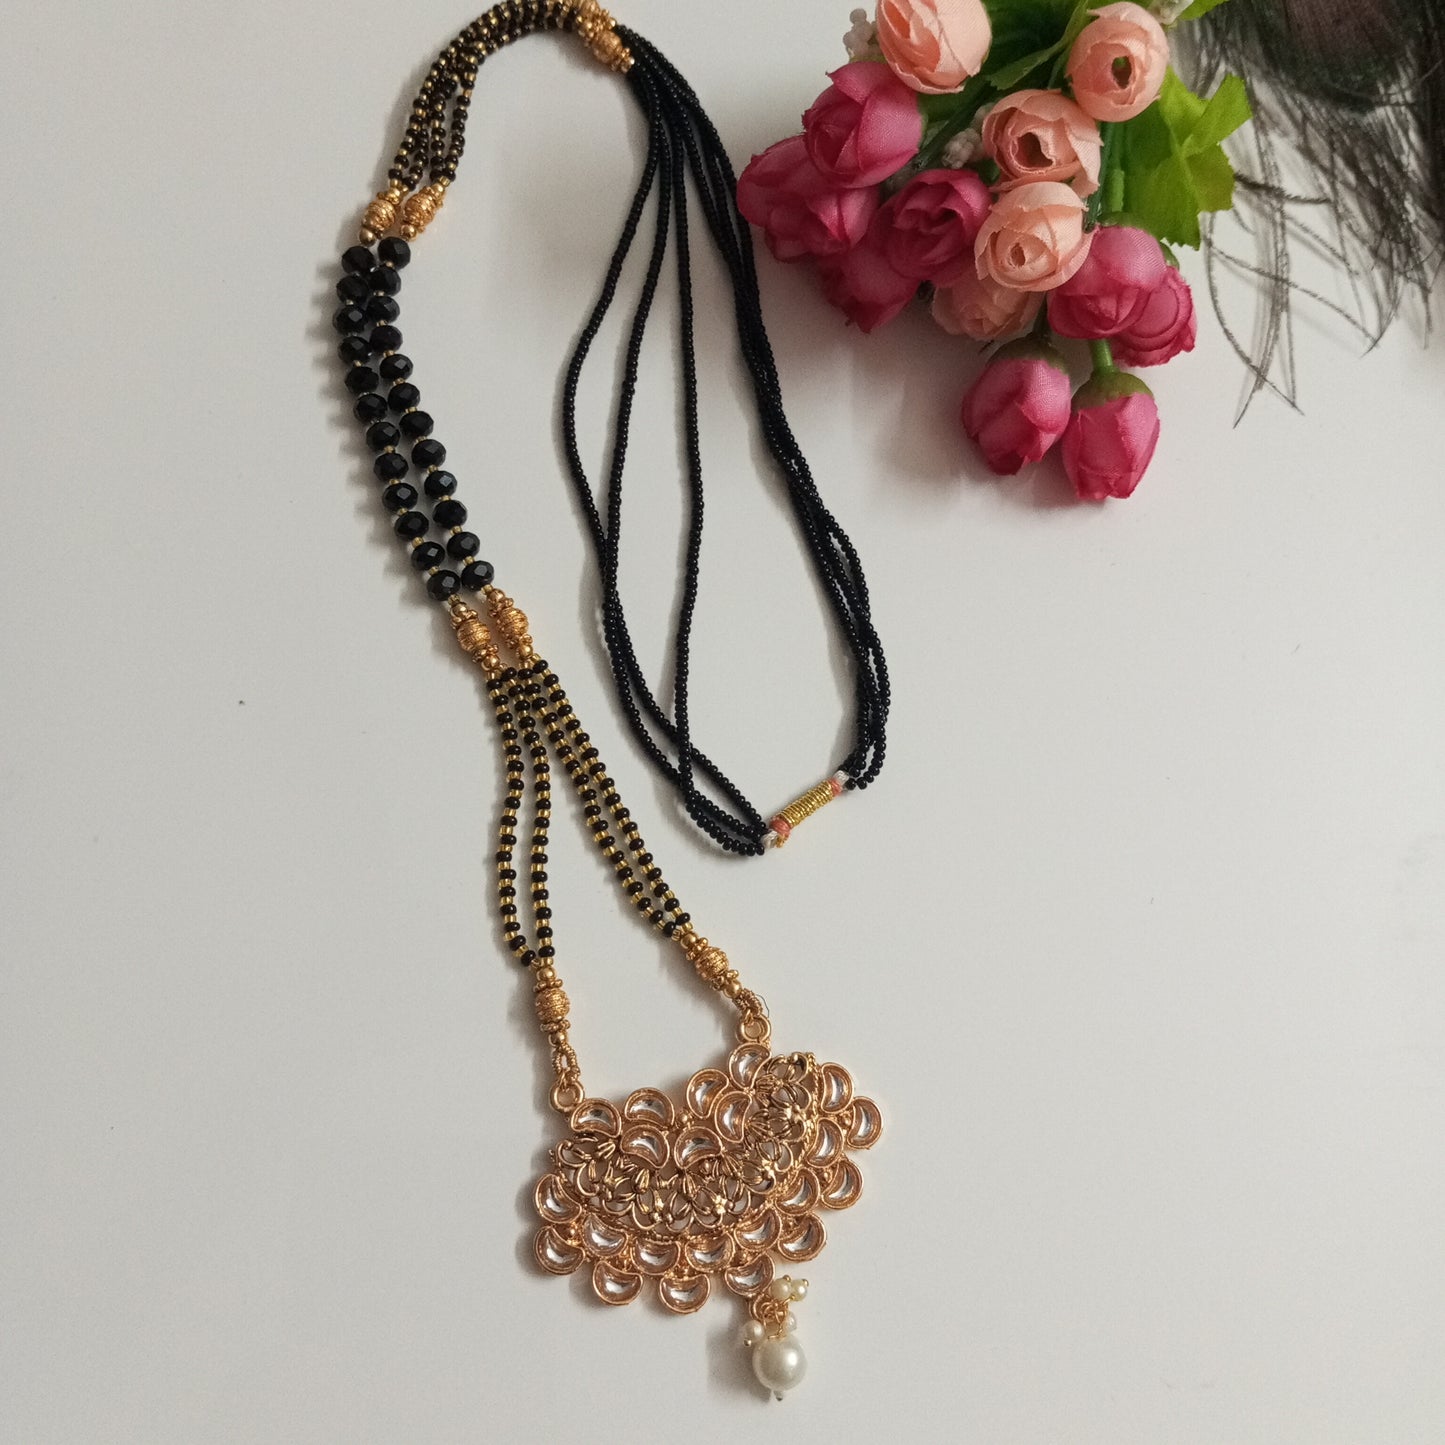 Cz studded Long Mangalsutra with Broad Pendant and a Hanging Pearl